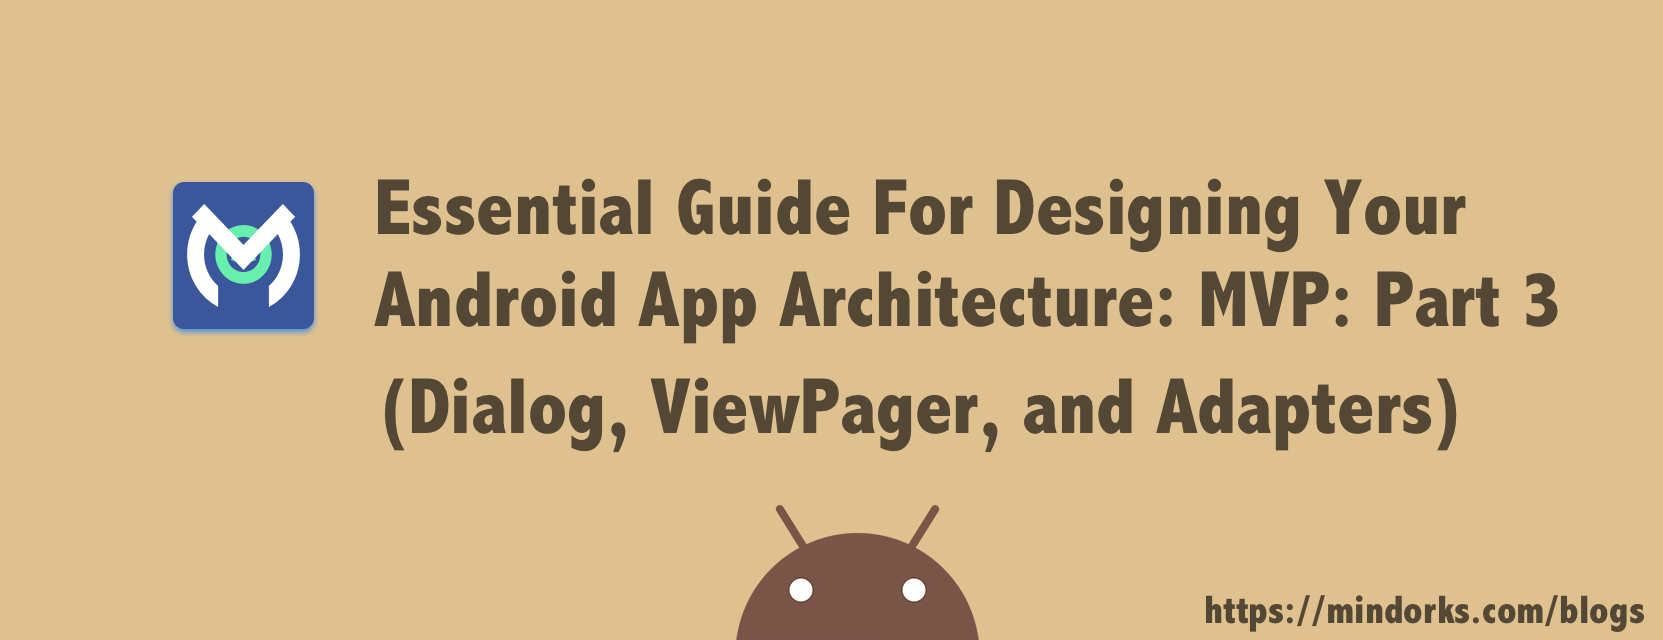 Essential Guide For Designing Your Android App Architecture: MVP: Part 3 (Dialog, ViewPager, and Adapters)